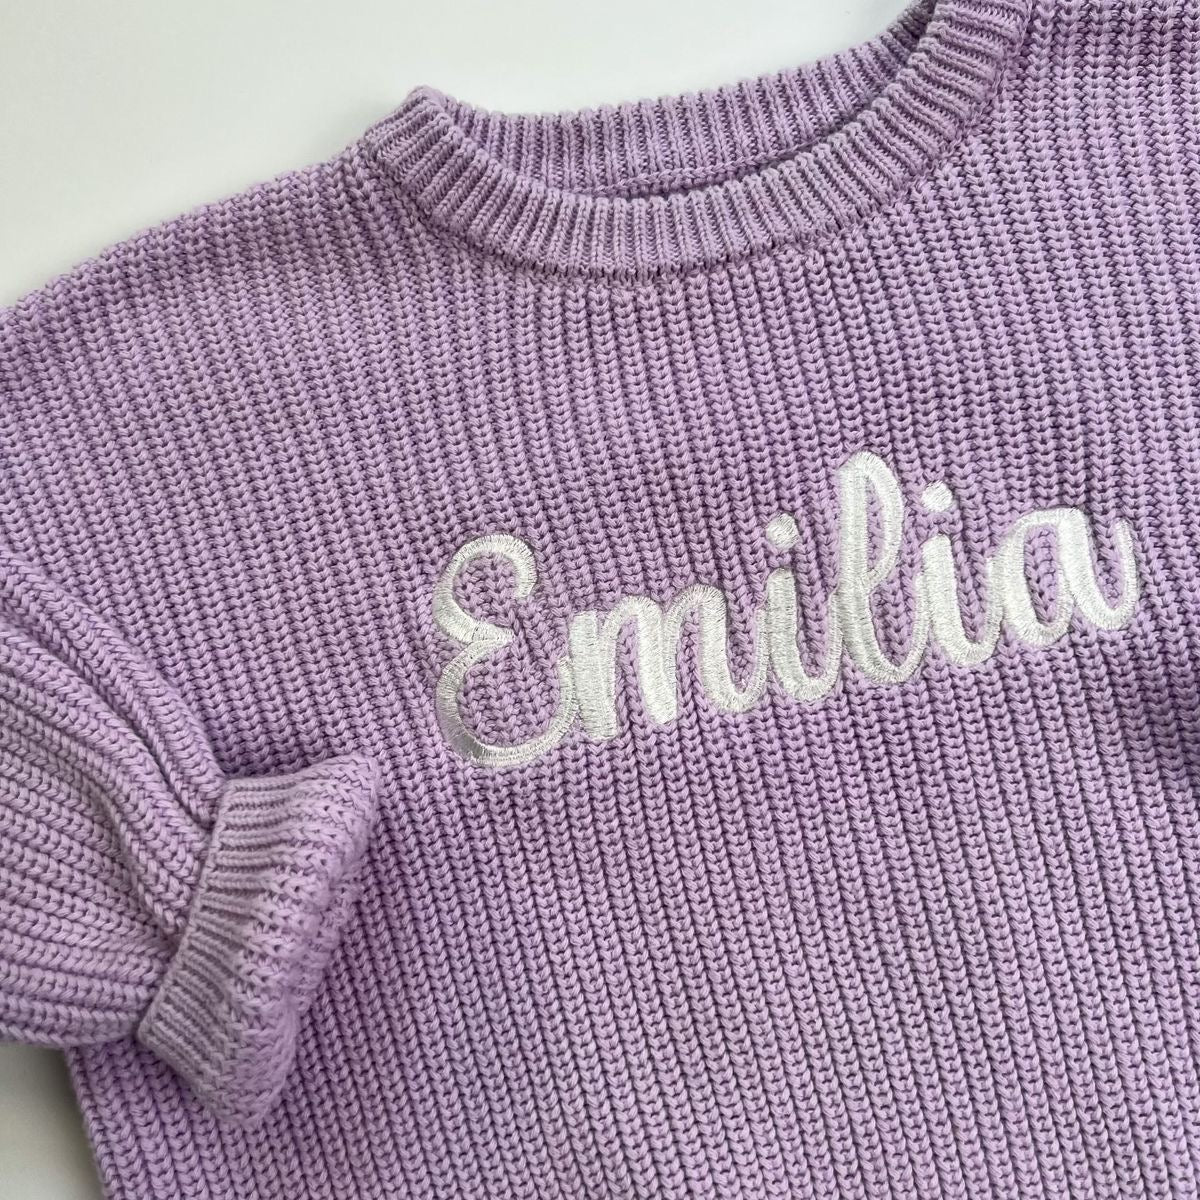 PERSONALIZED BABY SWEATER